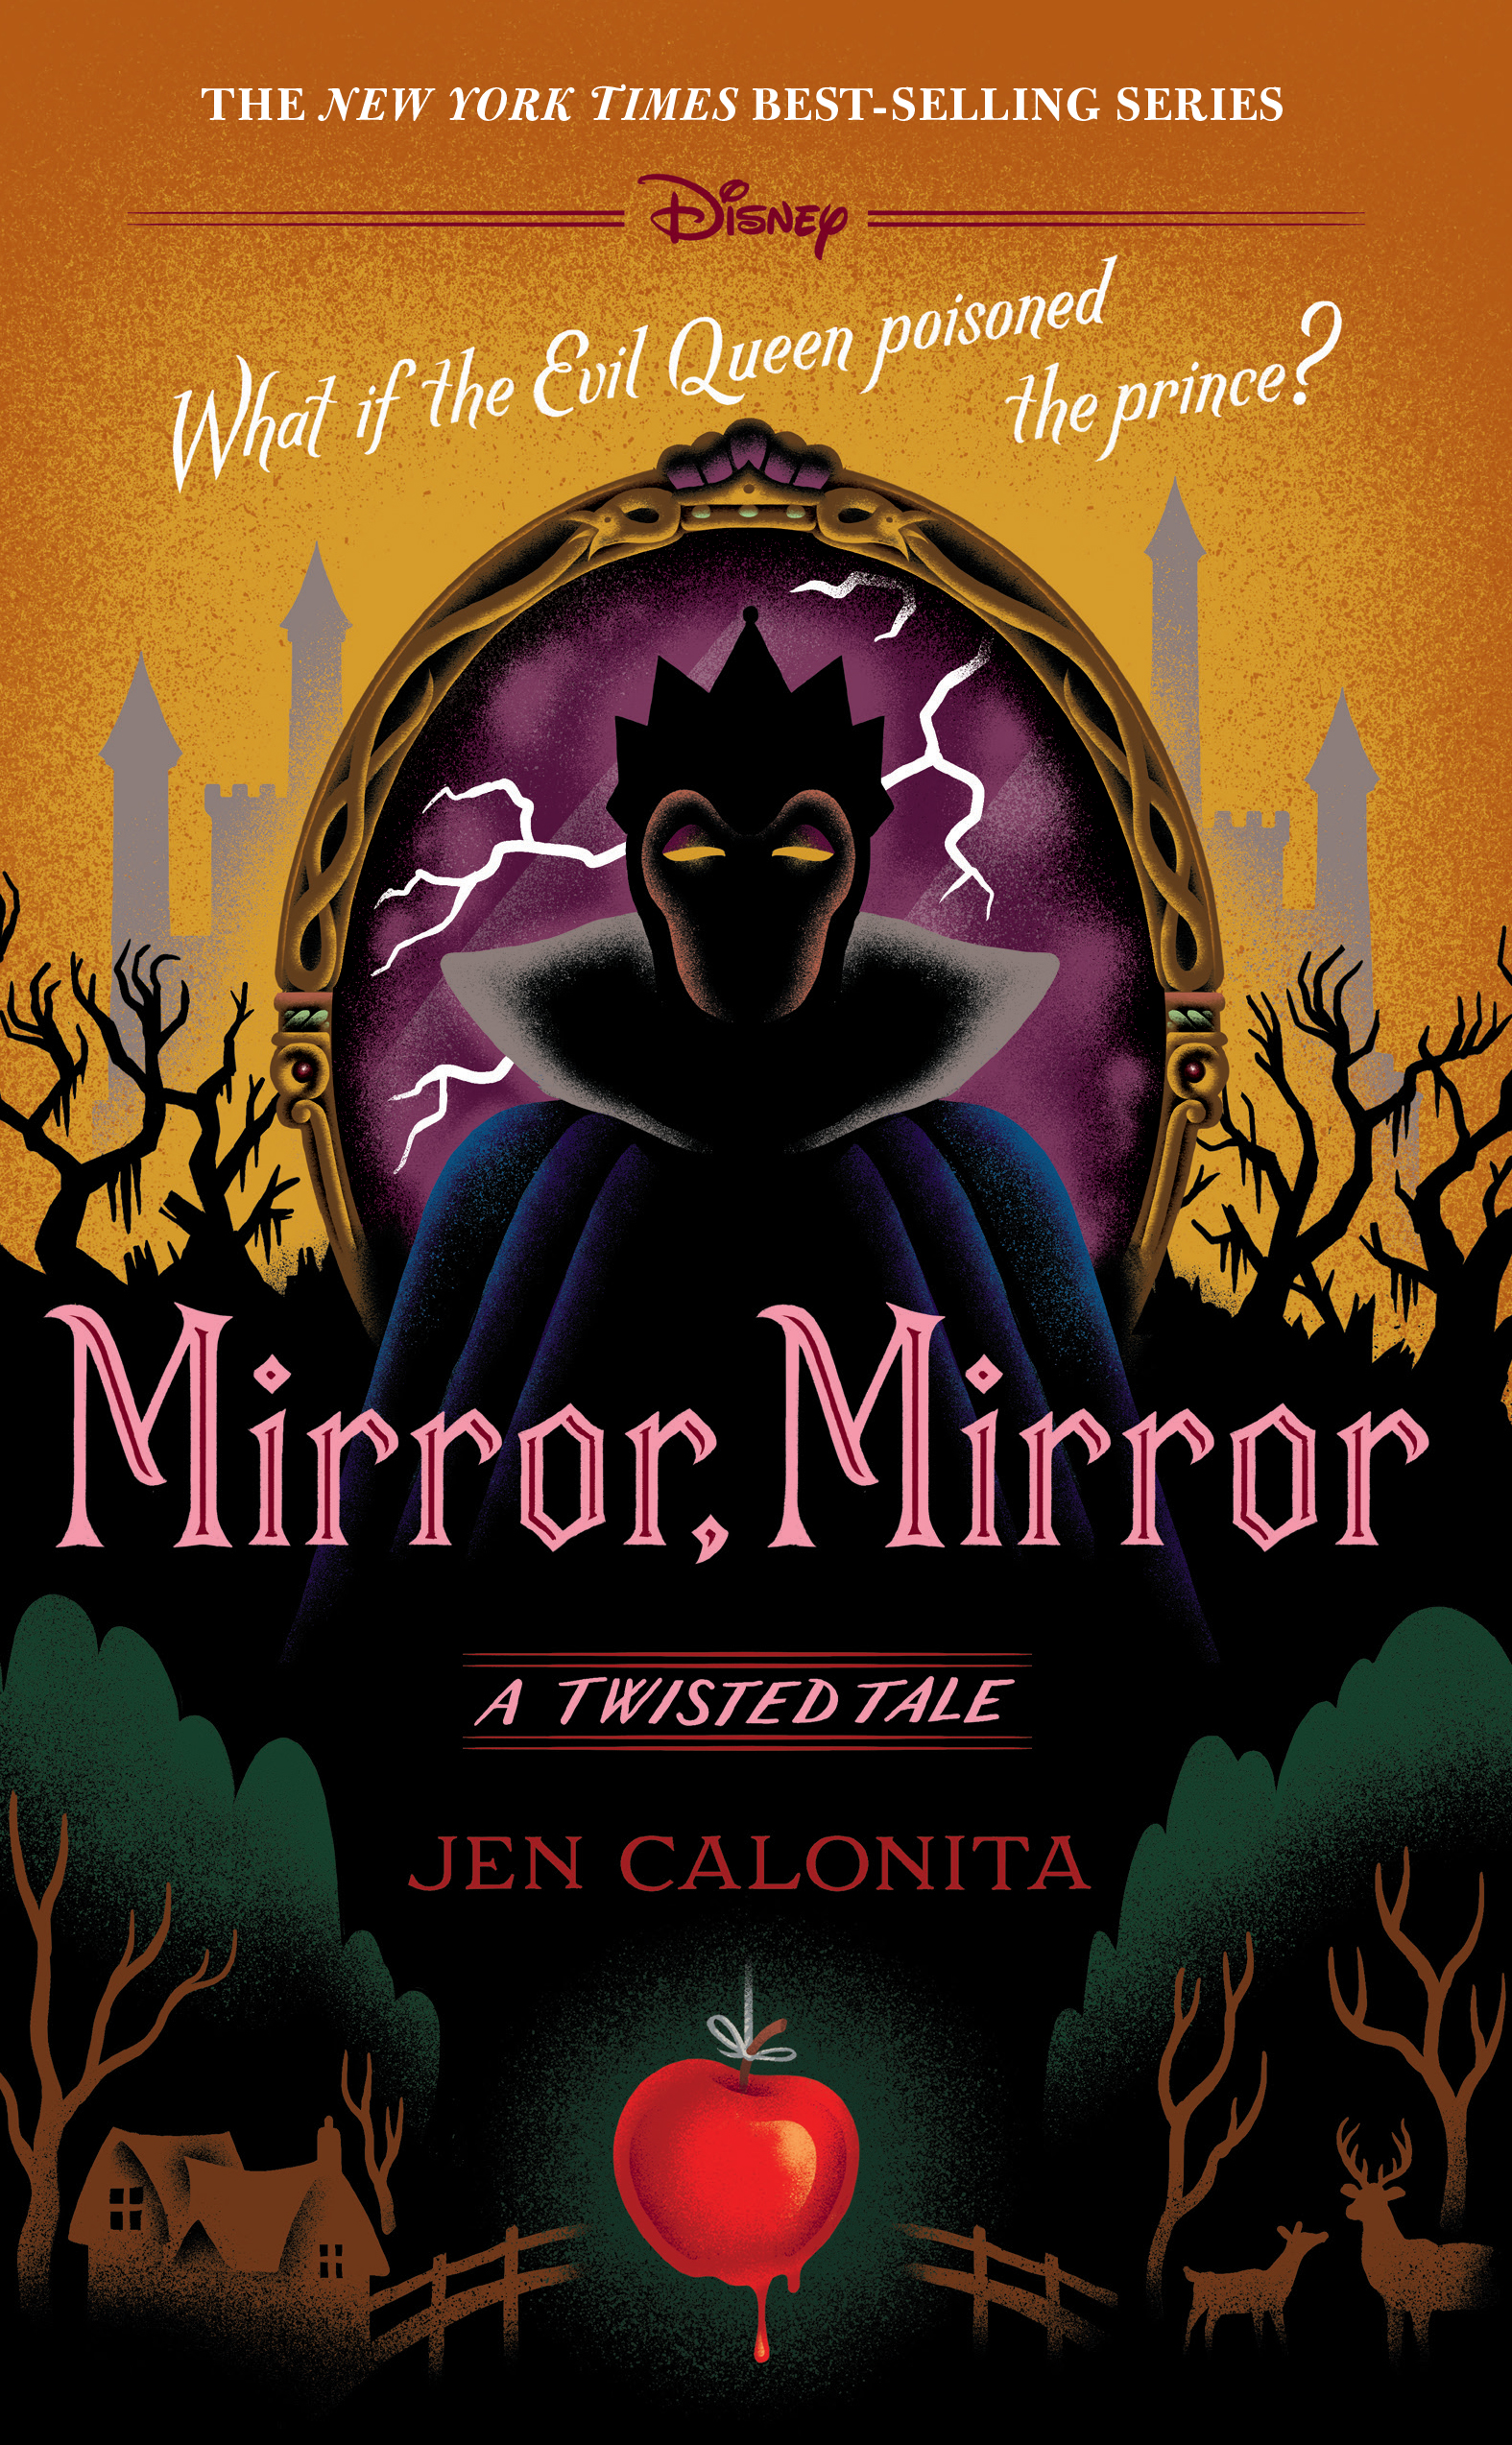 Mirror, Mirror A Twisted Tale by Jen Calonita - A Twisted Tale - Disney,  Princess, Snow White and the Seven Dwarfs Books